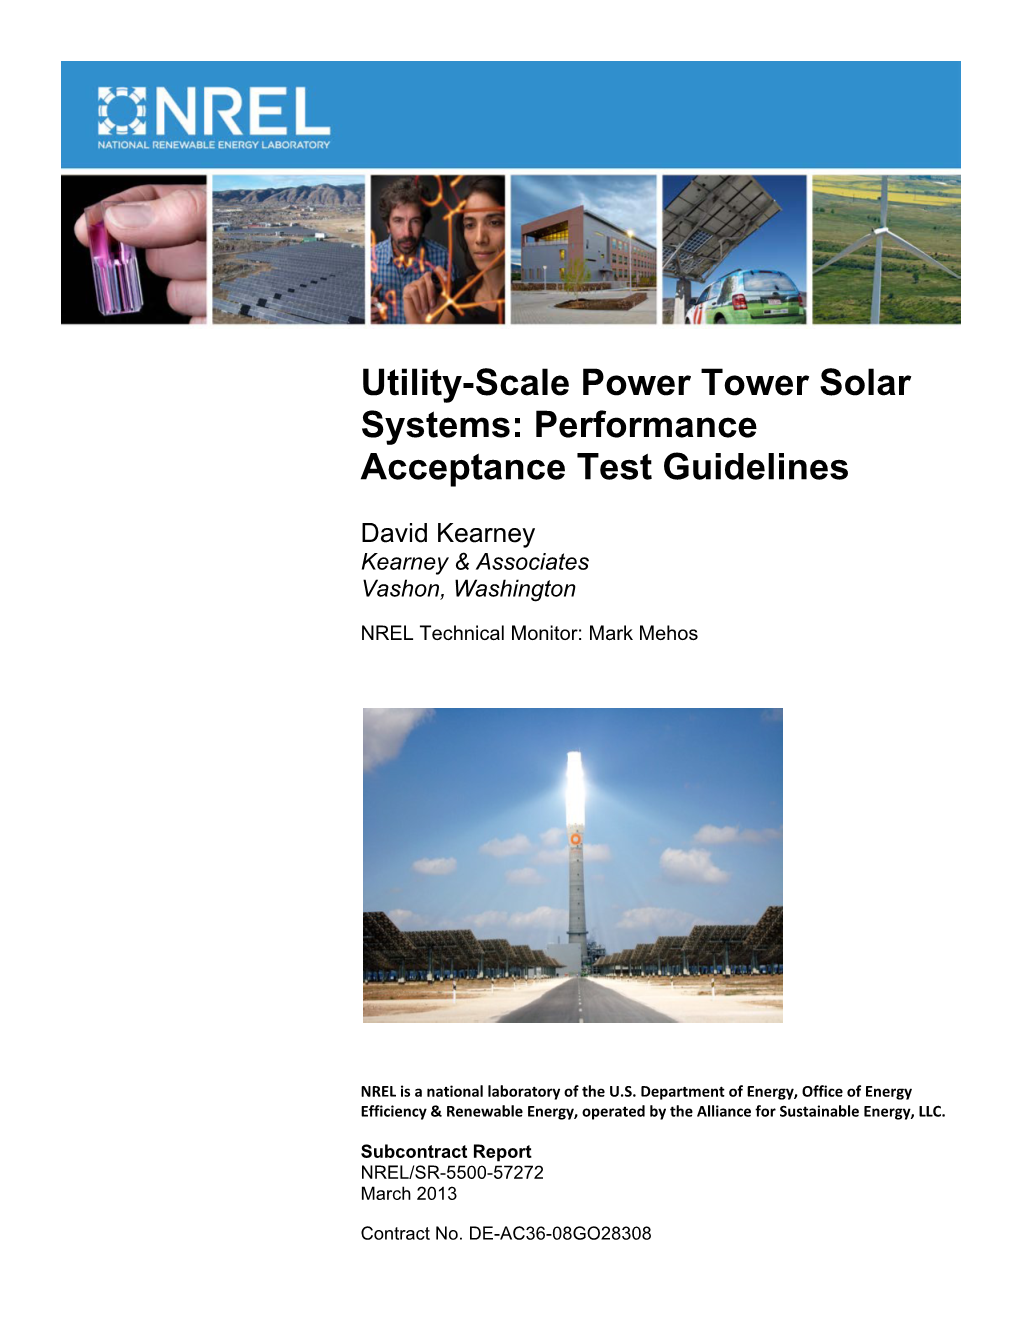 Utility-Scale Power Tower Solar Systems: Performance Acceptance Test Guidelines